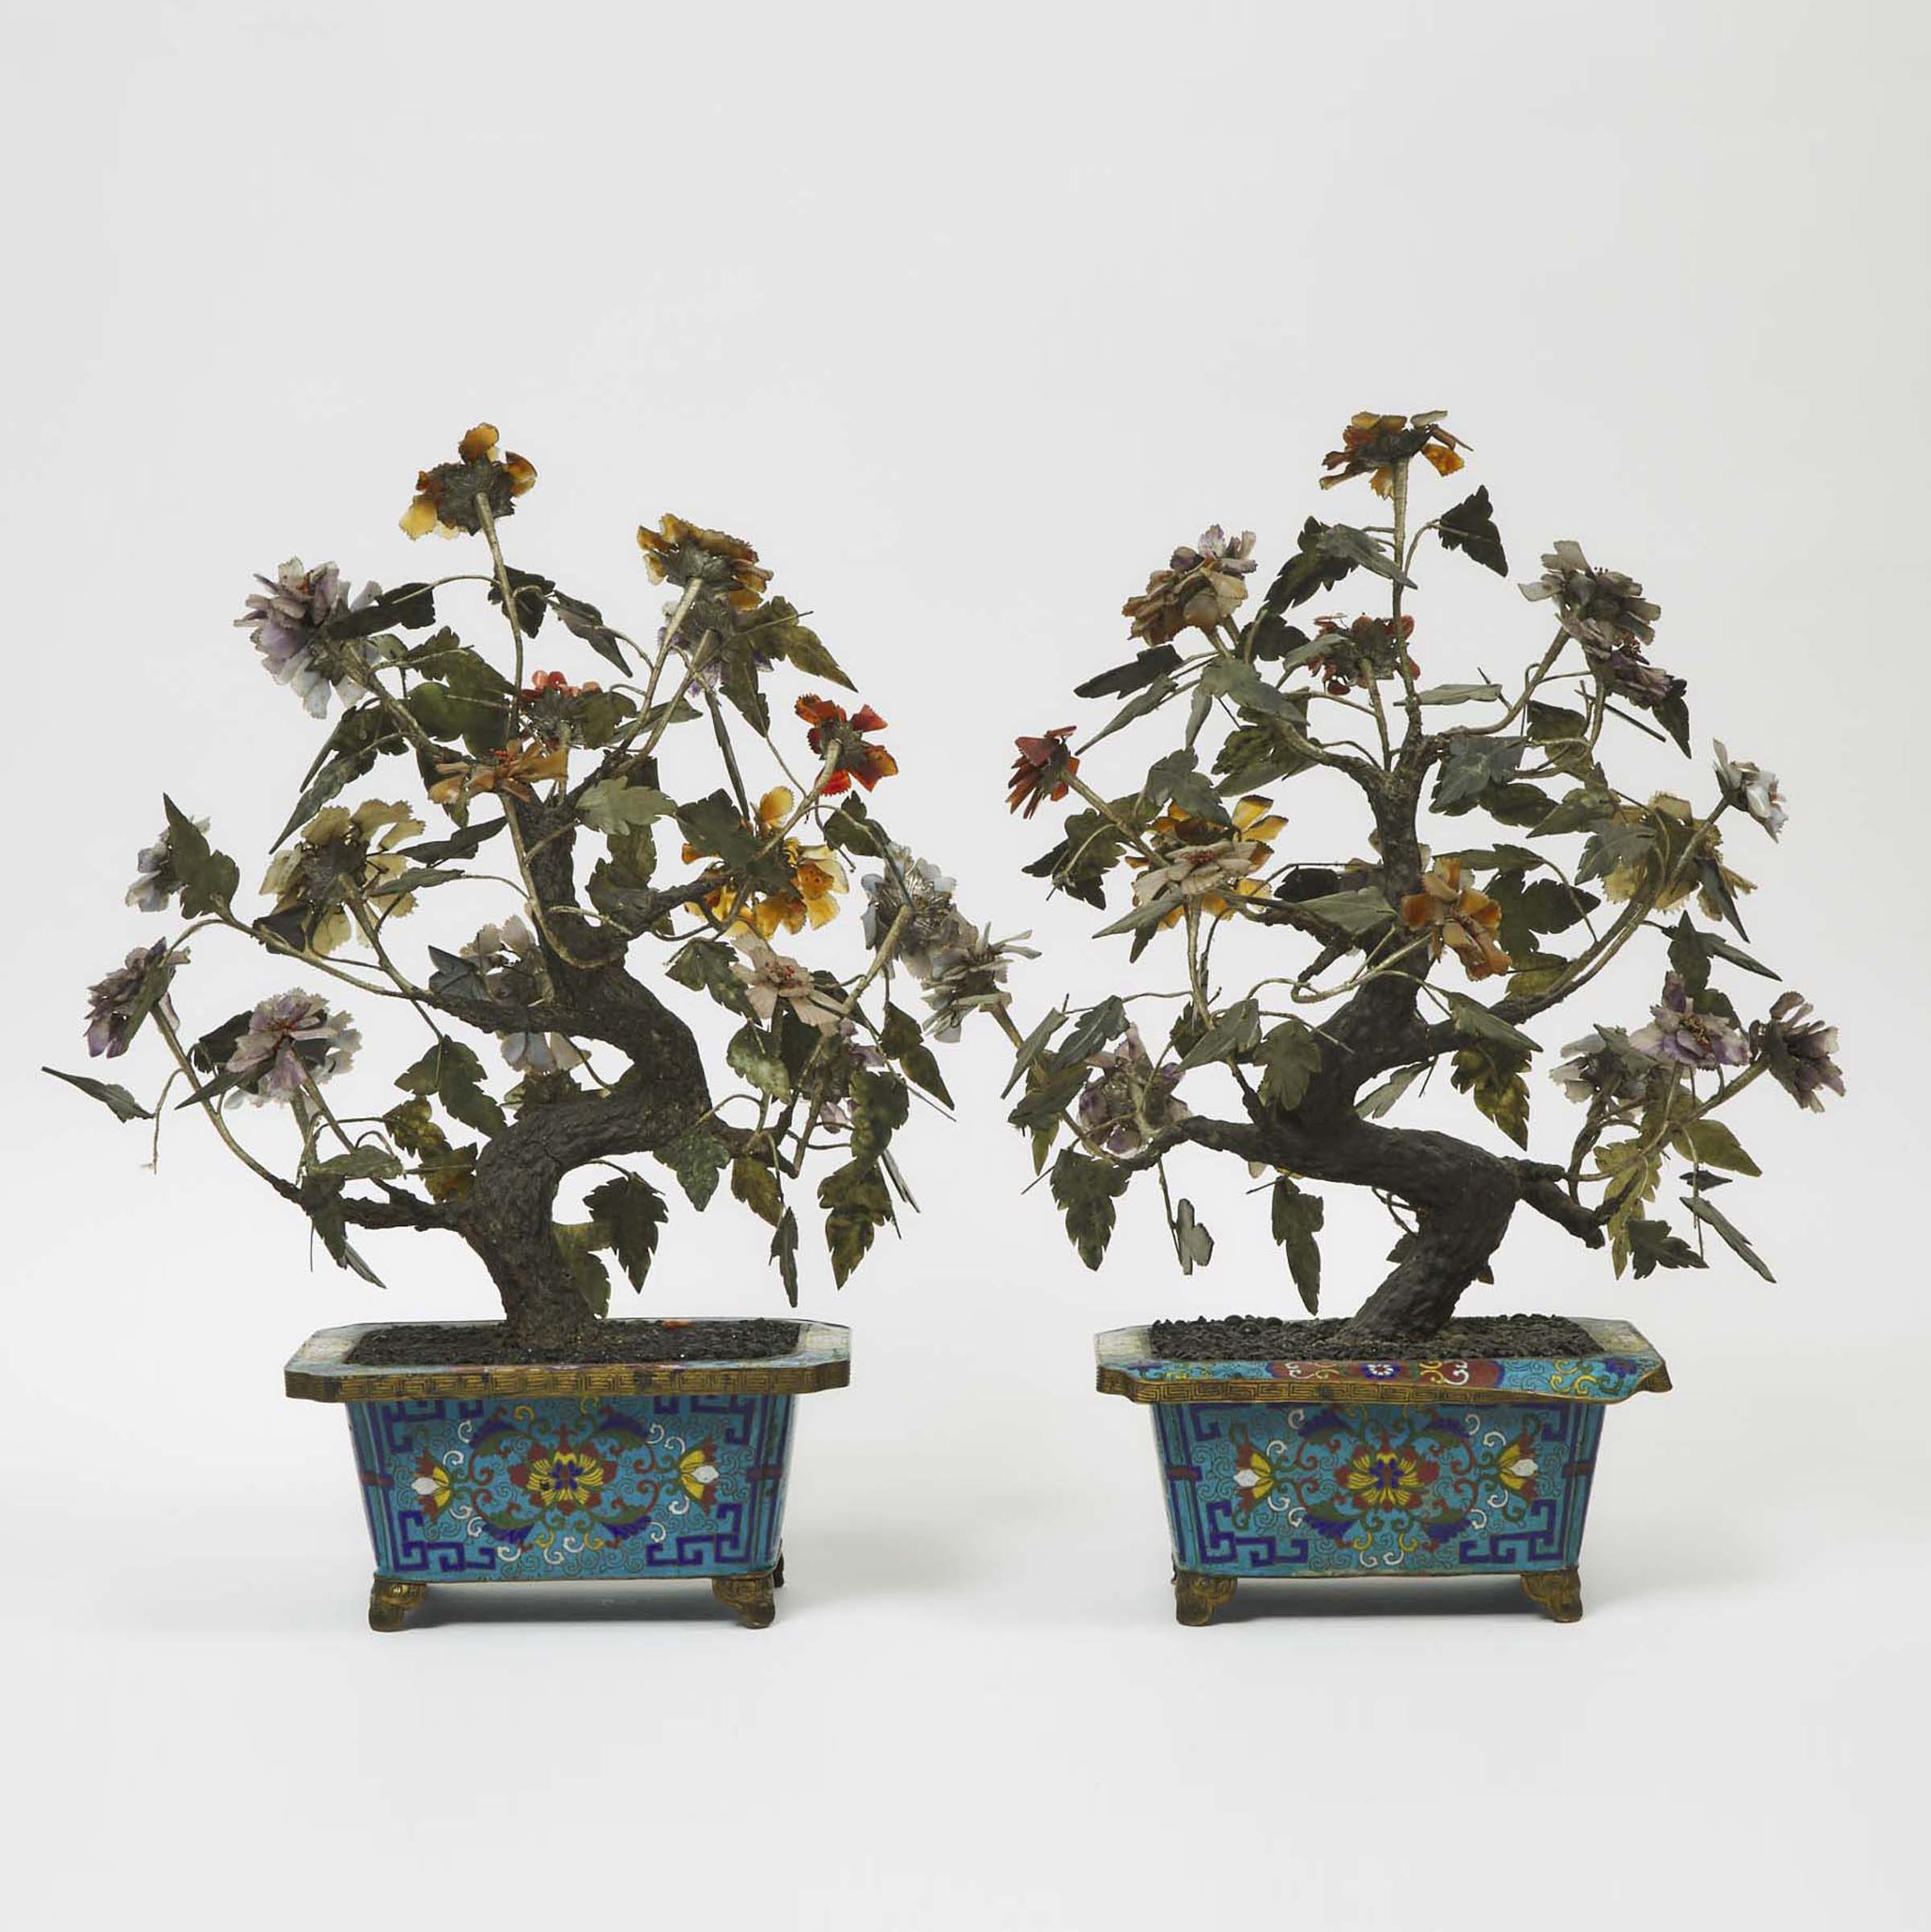 A Pair of Chinese Cloisonné Jardinieres with Hardstone Trees, Early 20th Century